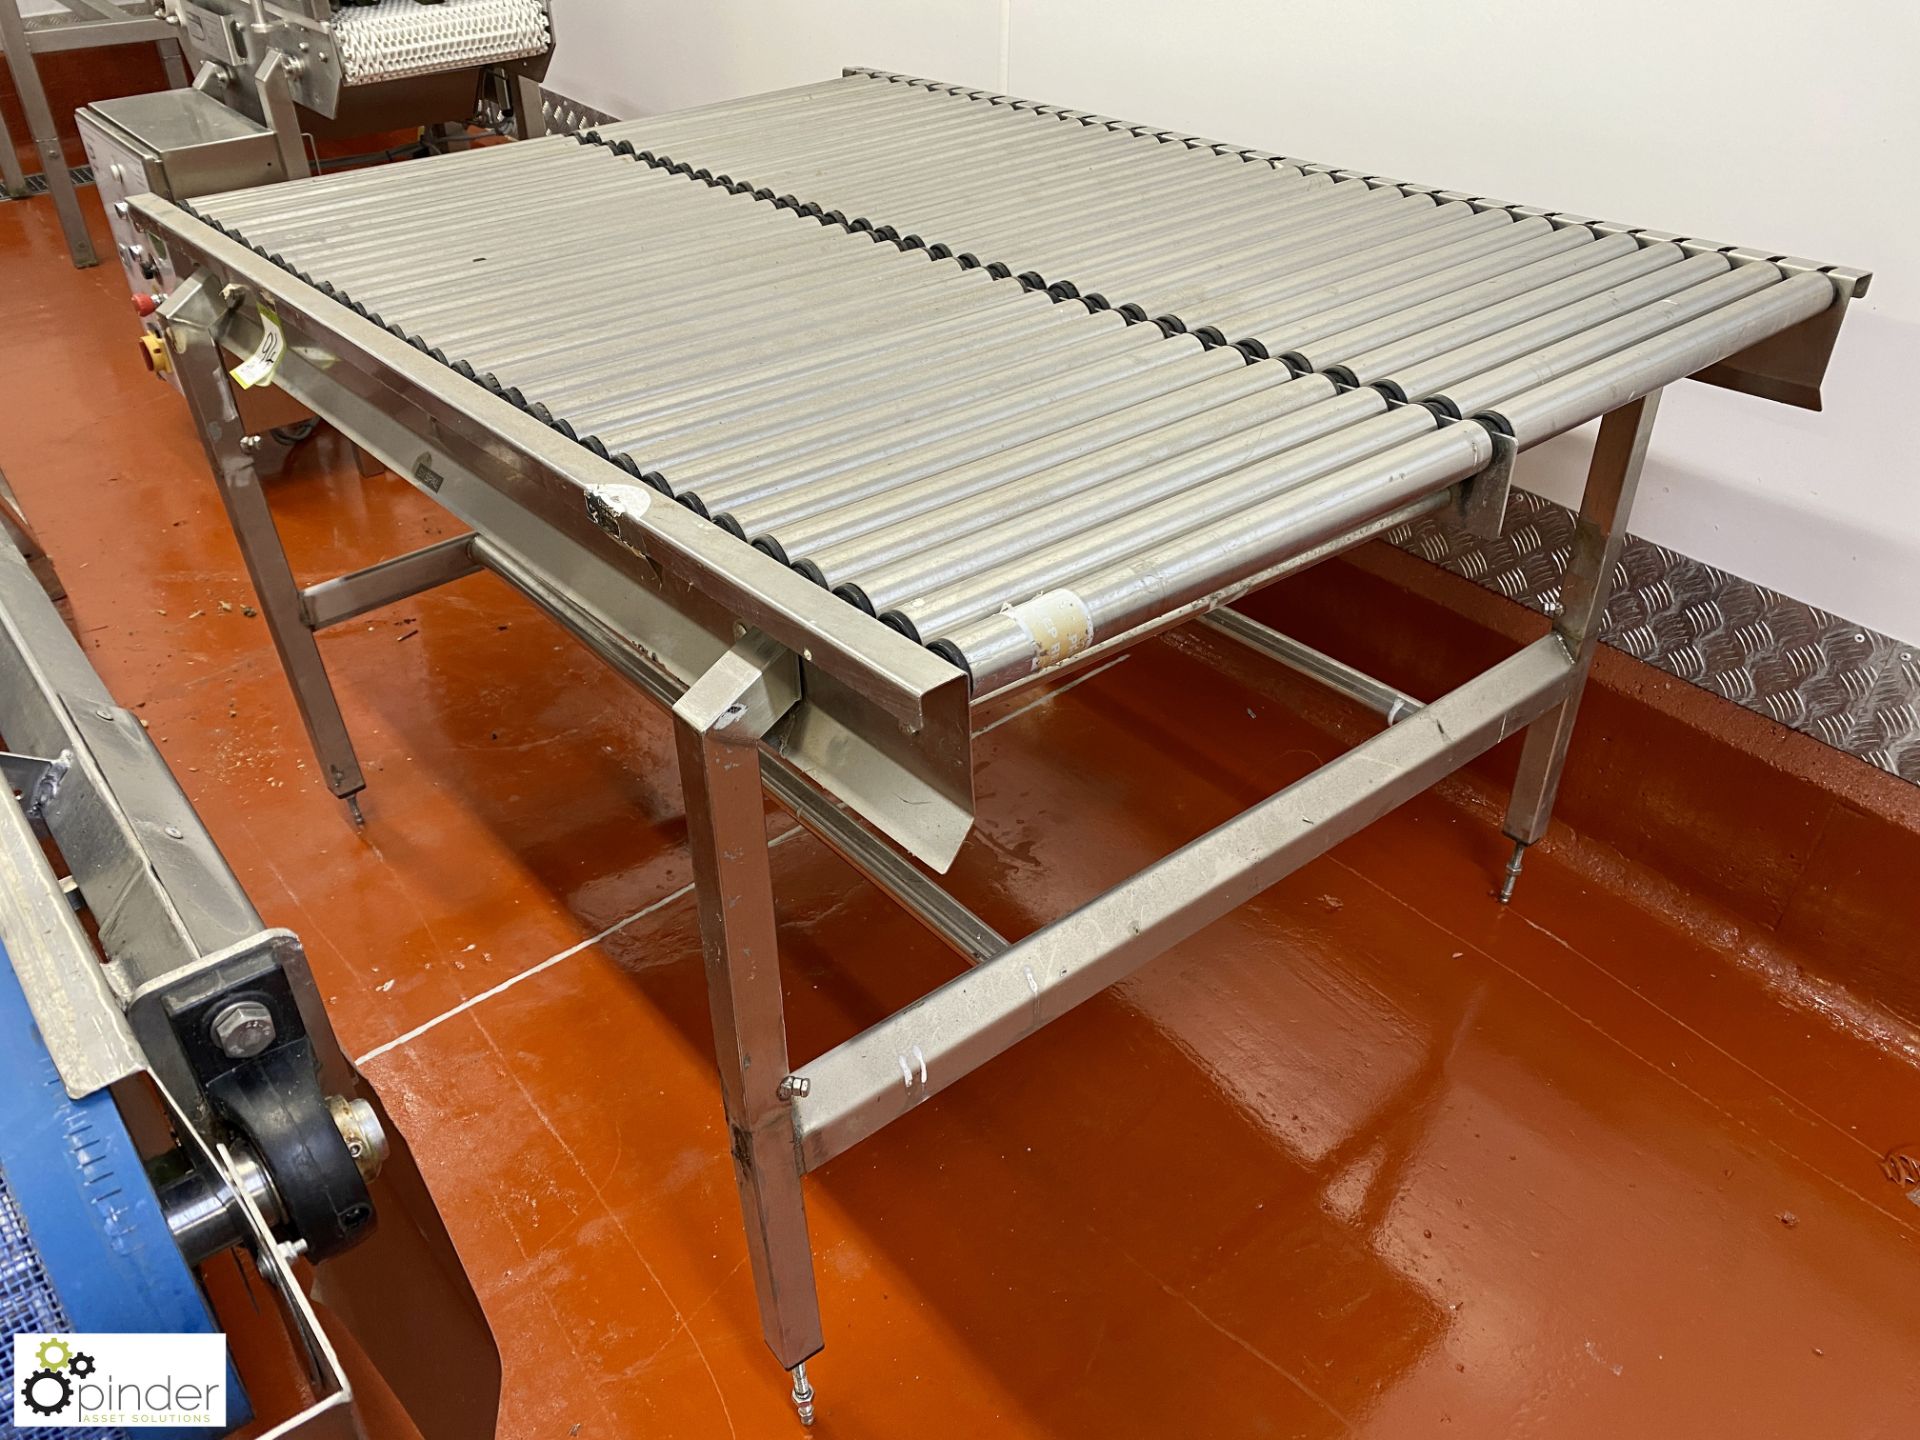 Stainless steel twin lane Roller Conveyor Table, 1450mm x 500mm per lane (Lift Out Fee: £30 plus